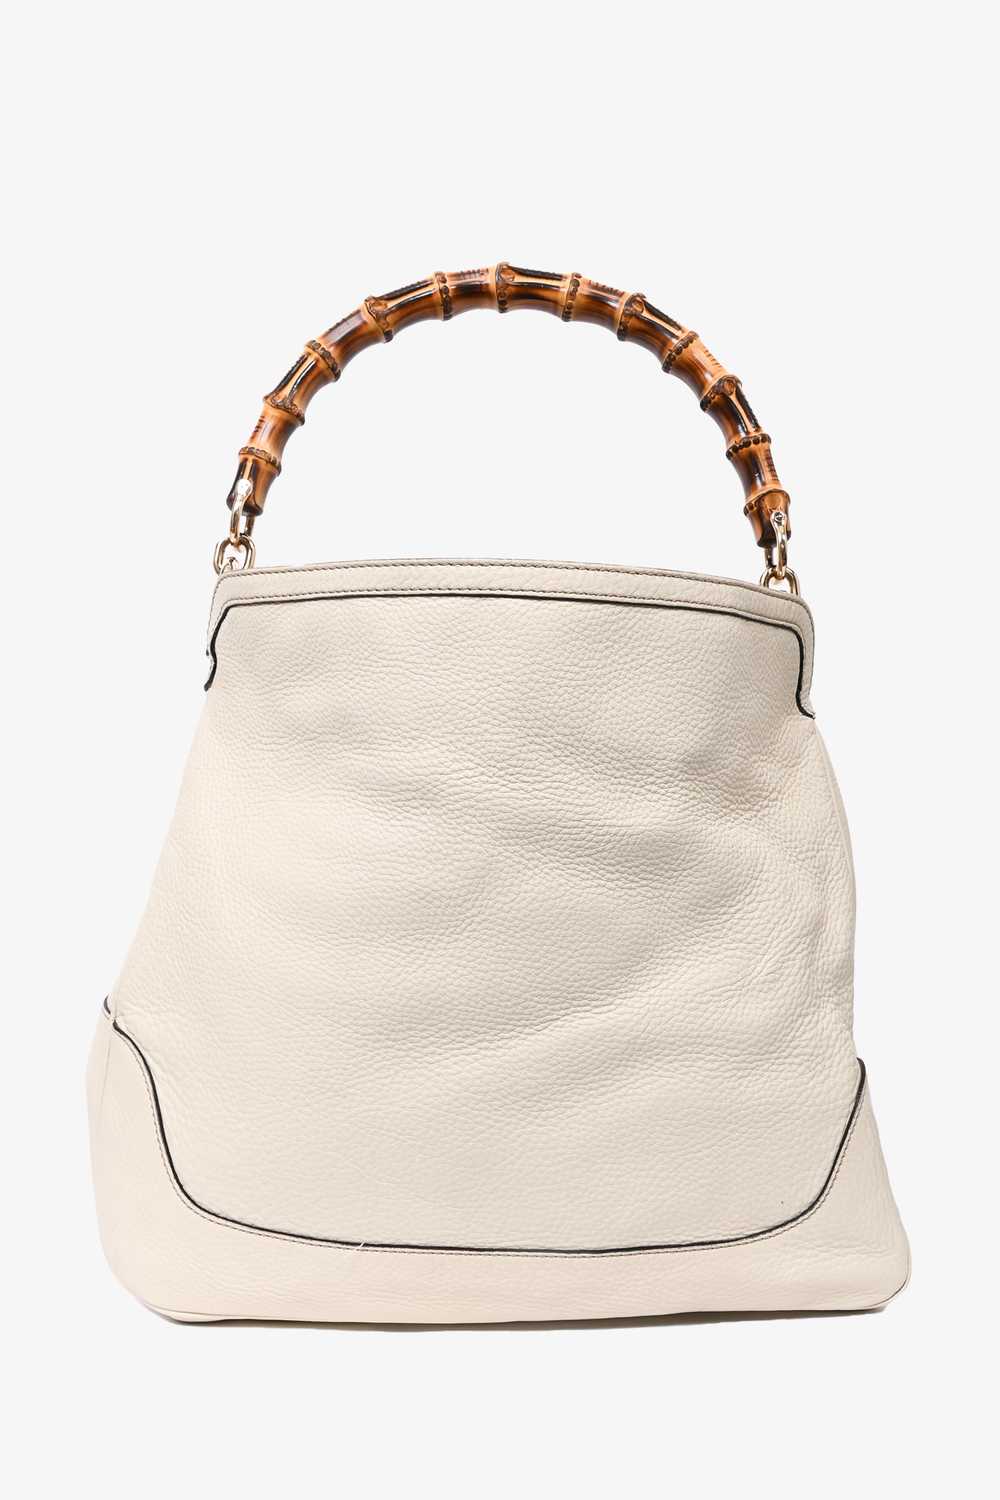 Gucci Cream Leather Bamboo 'Diana' Large Tote - image 2